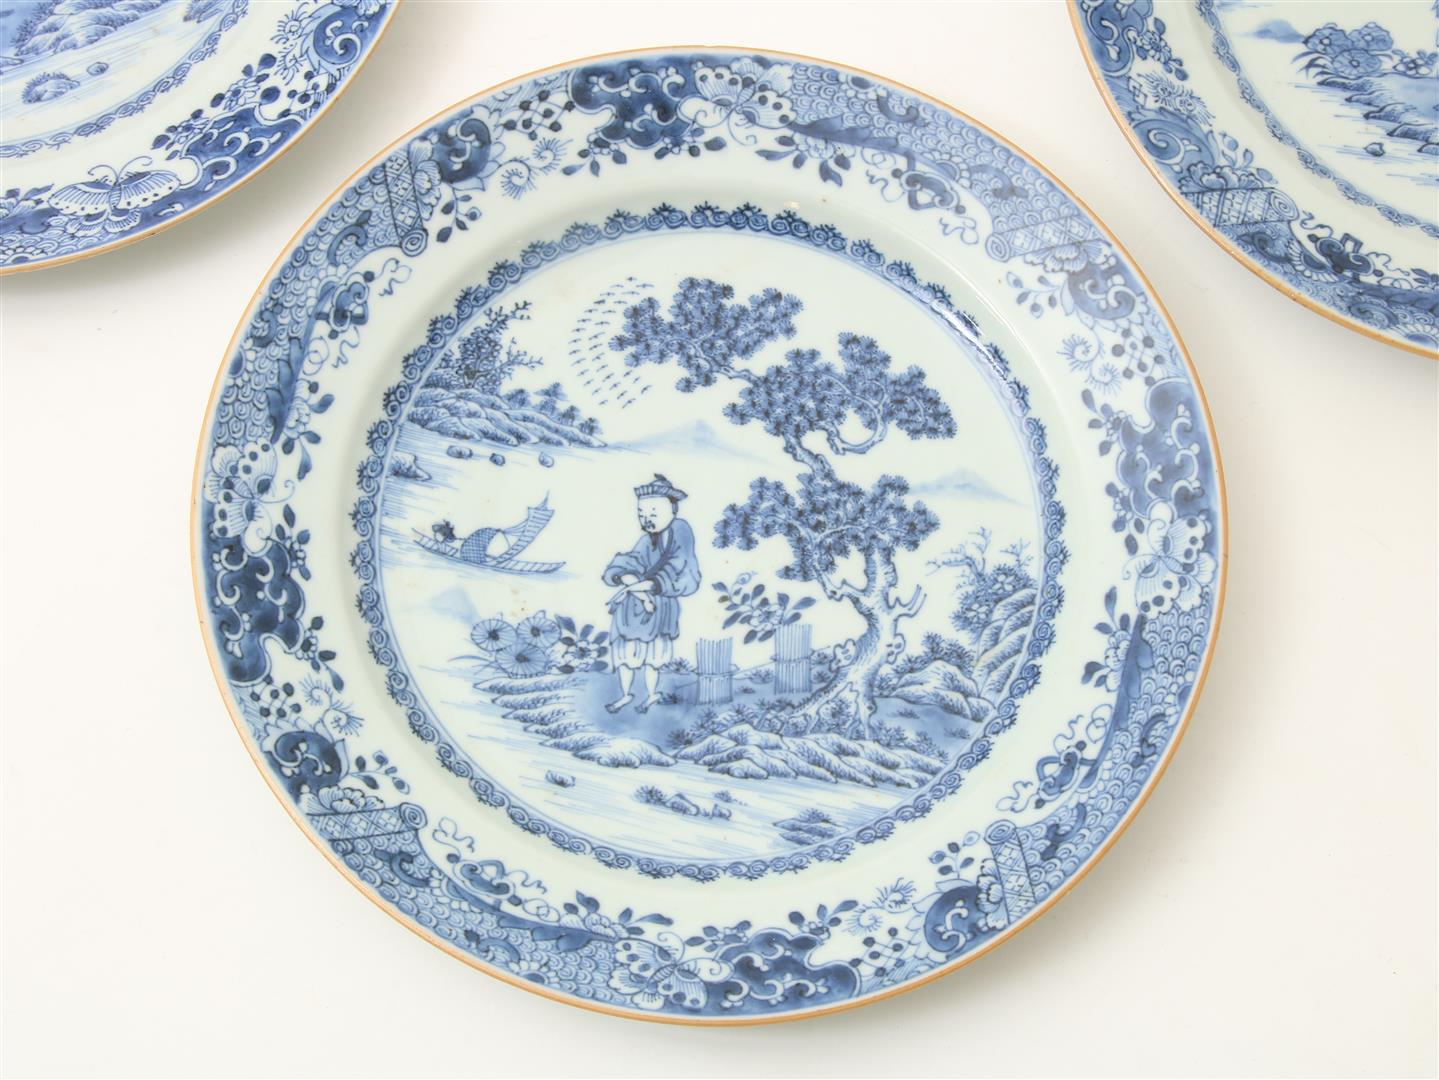 A set of 3 porcelain dishes decorated with a figure next to river, China 18th century, Qianlong, - Image 2 of 6